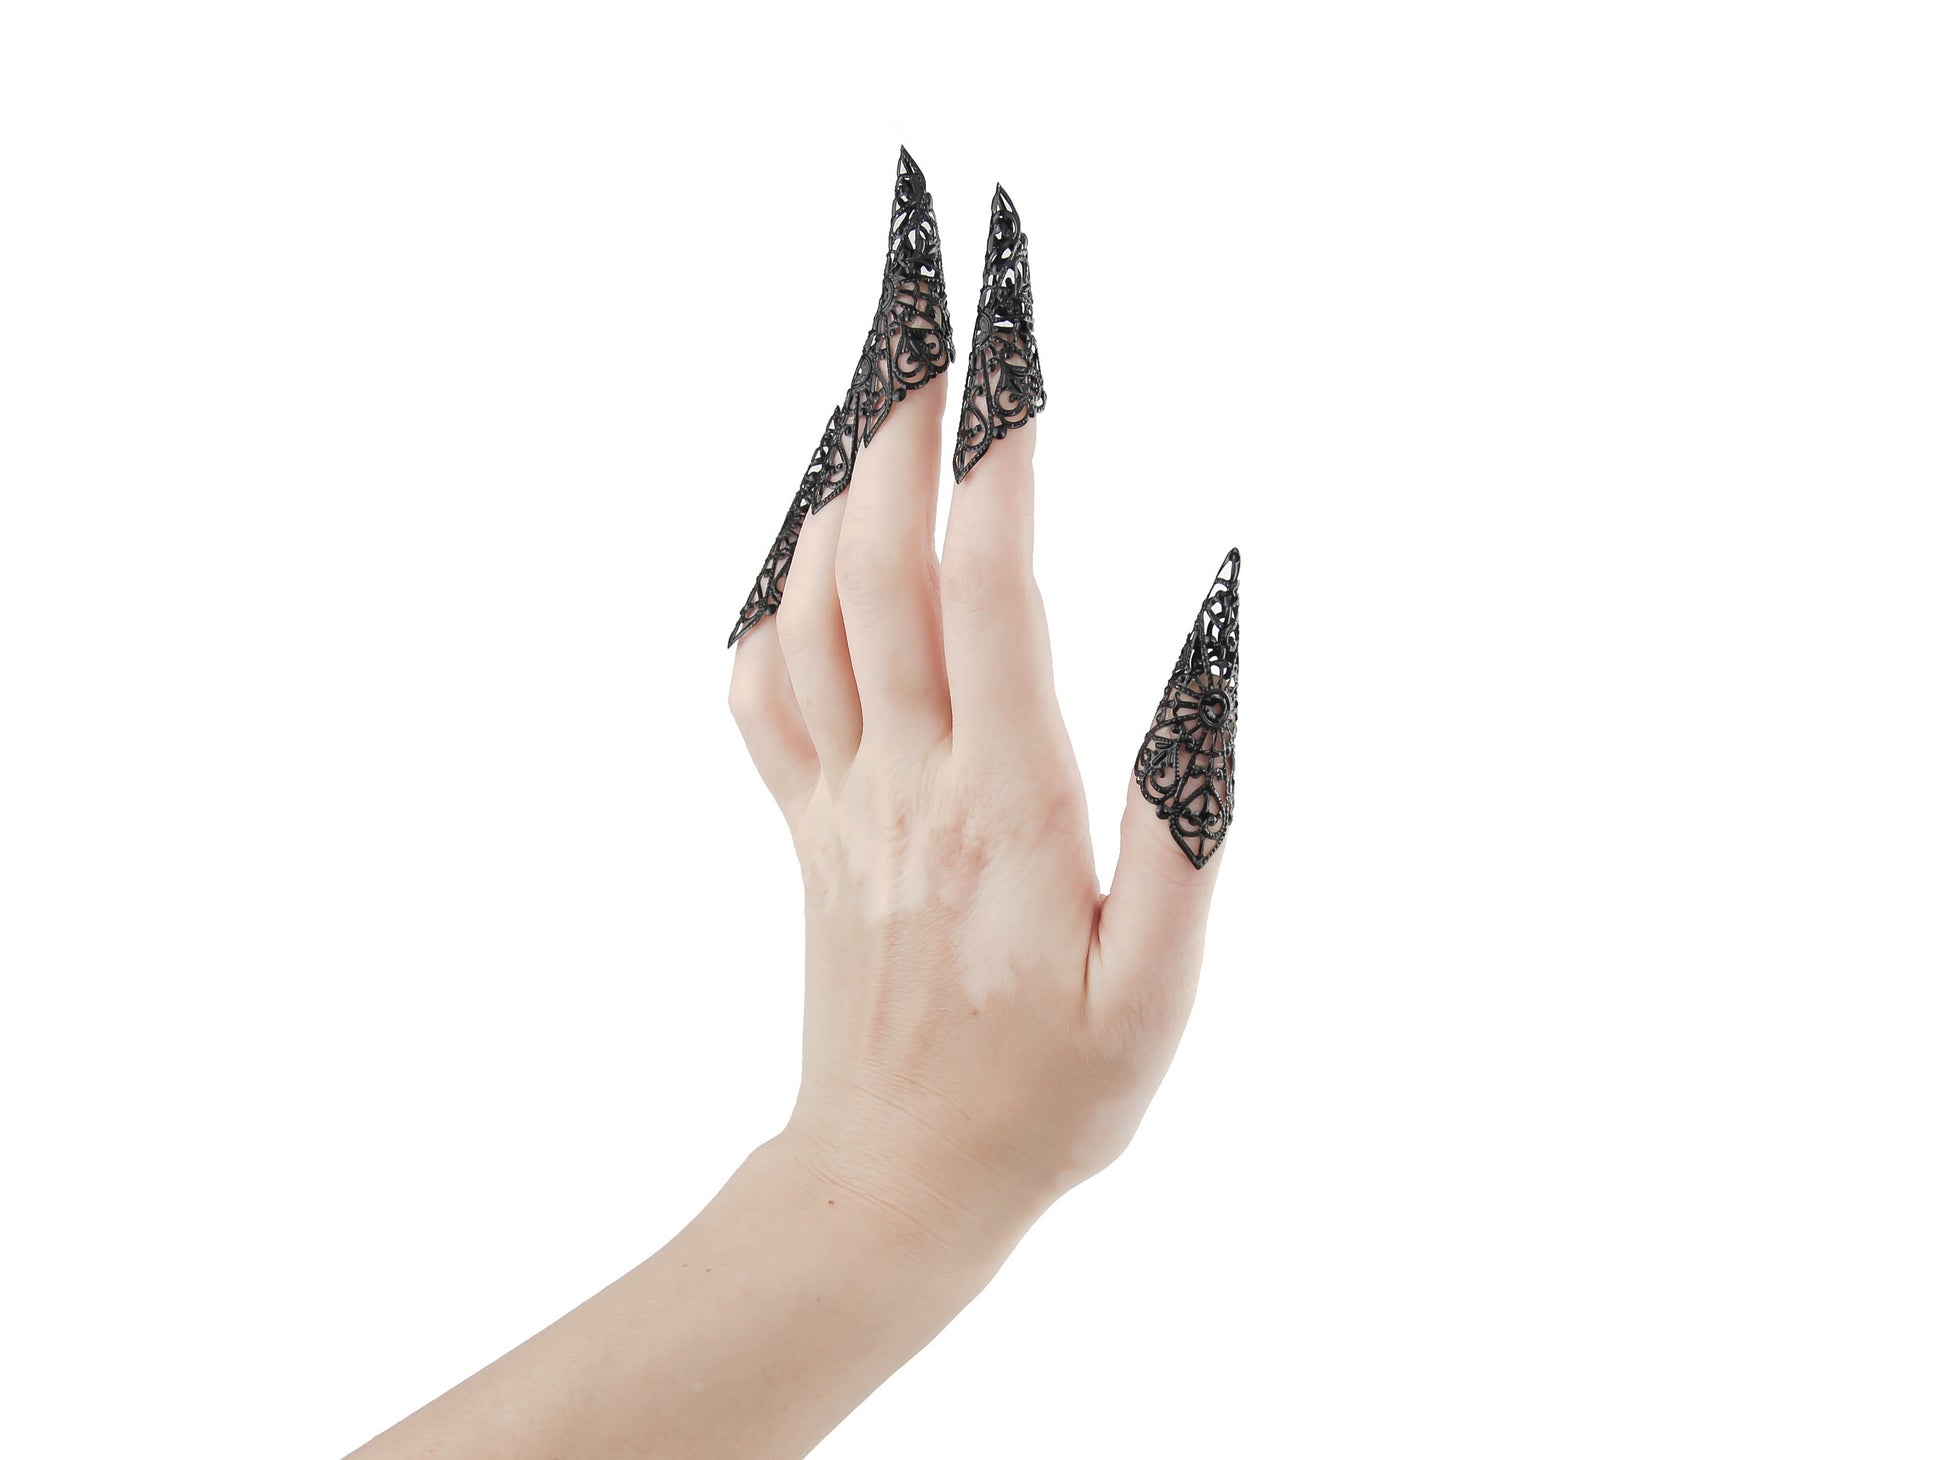 Exquisitely crafted Myril Jewels full hand set of black nail claws, intricately designed with a filigree that embodies the neo-gothic aesthetic, perfect for those embracing dark avant-garde fashion. This luxurious set aligns with the gothic-chic style, suitable for whimsical everyday wear, or as a bold statement for Halloween, rave parties, and festival occasions.